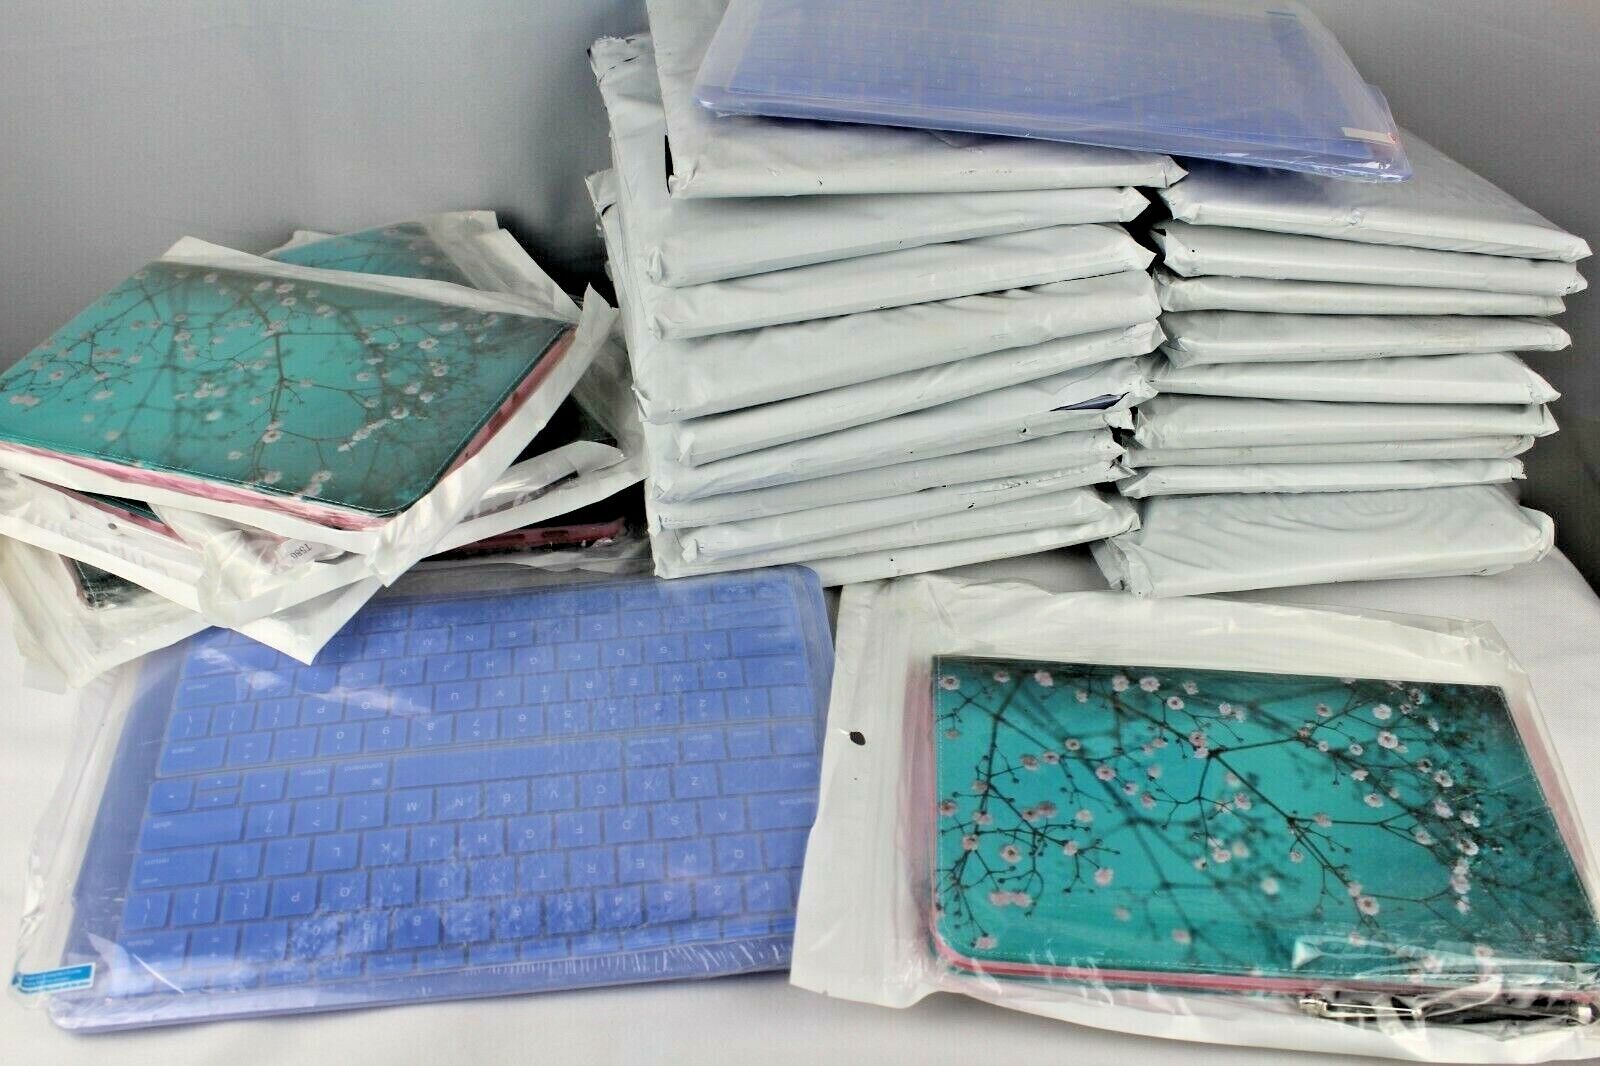 LOT OF 27 Tablet Cases designed for Macbook & others Mixed Lot Wholesale Resell